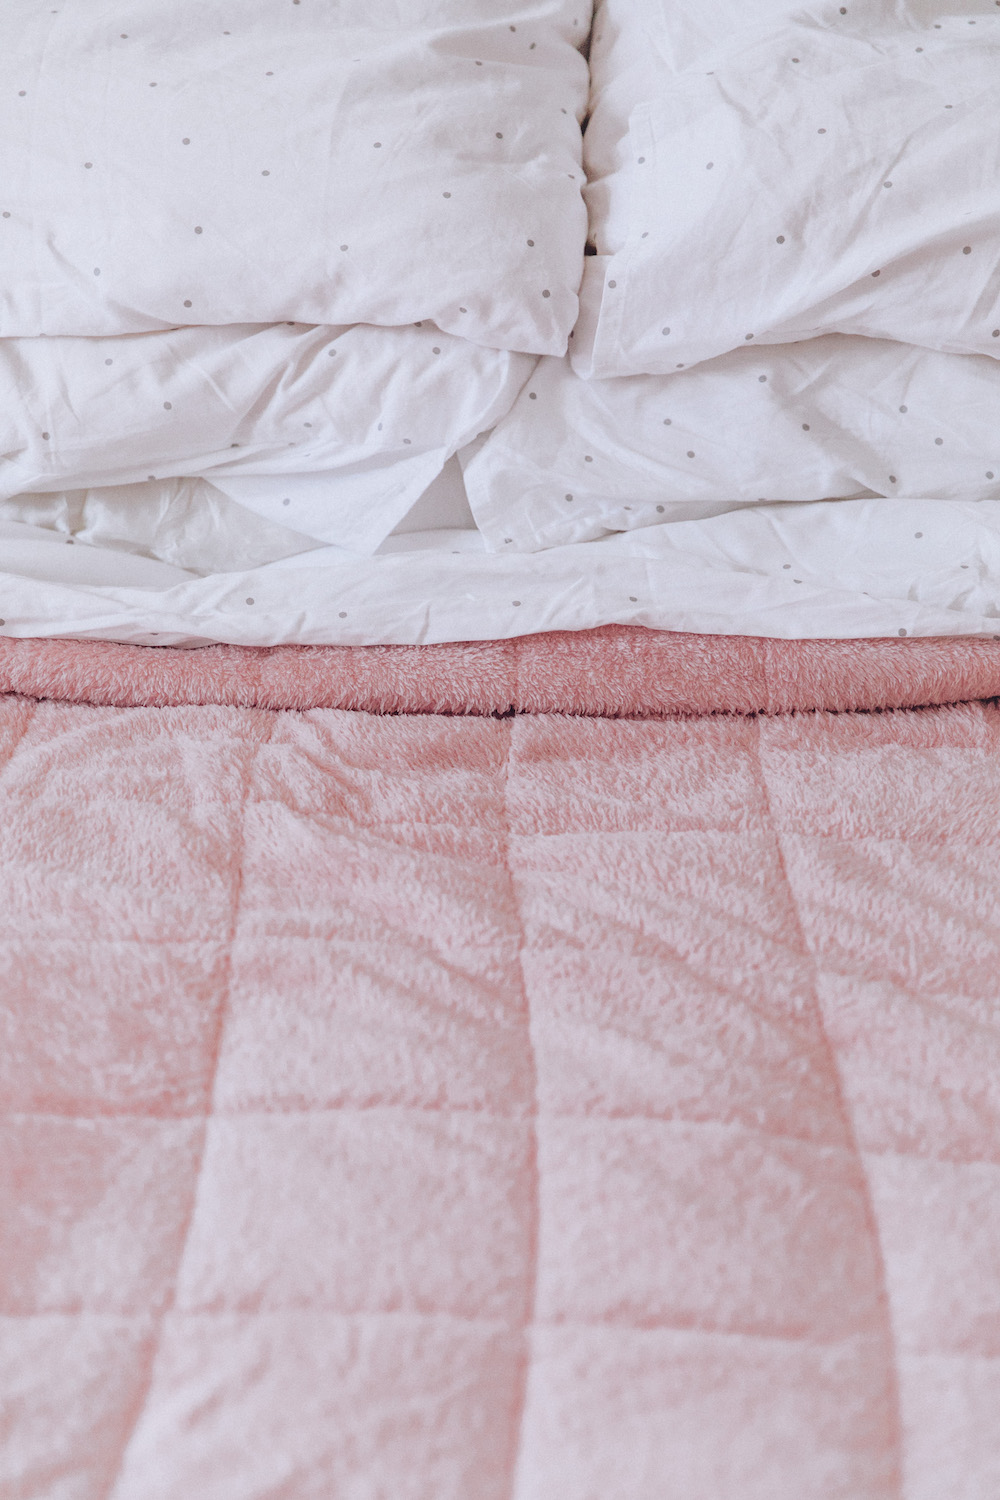 Weighted Blanket Review & Benefits For Sleep